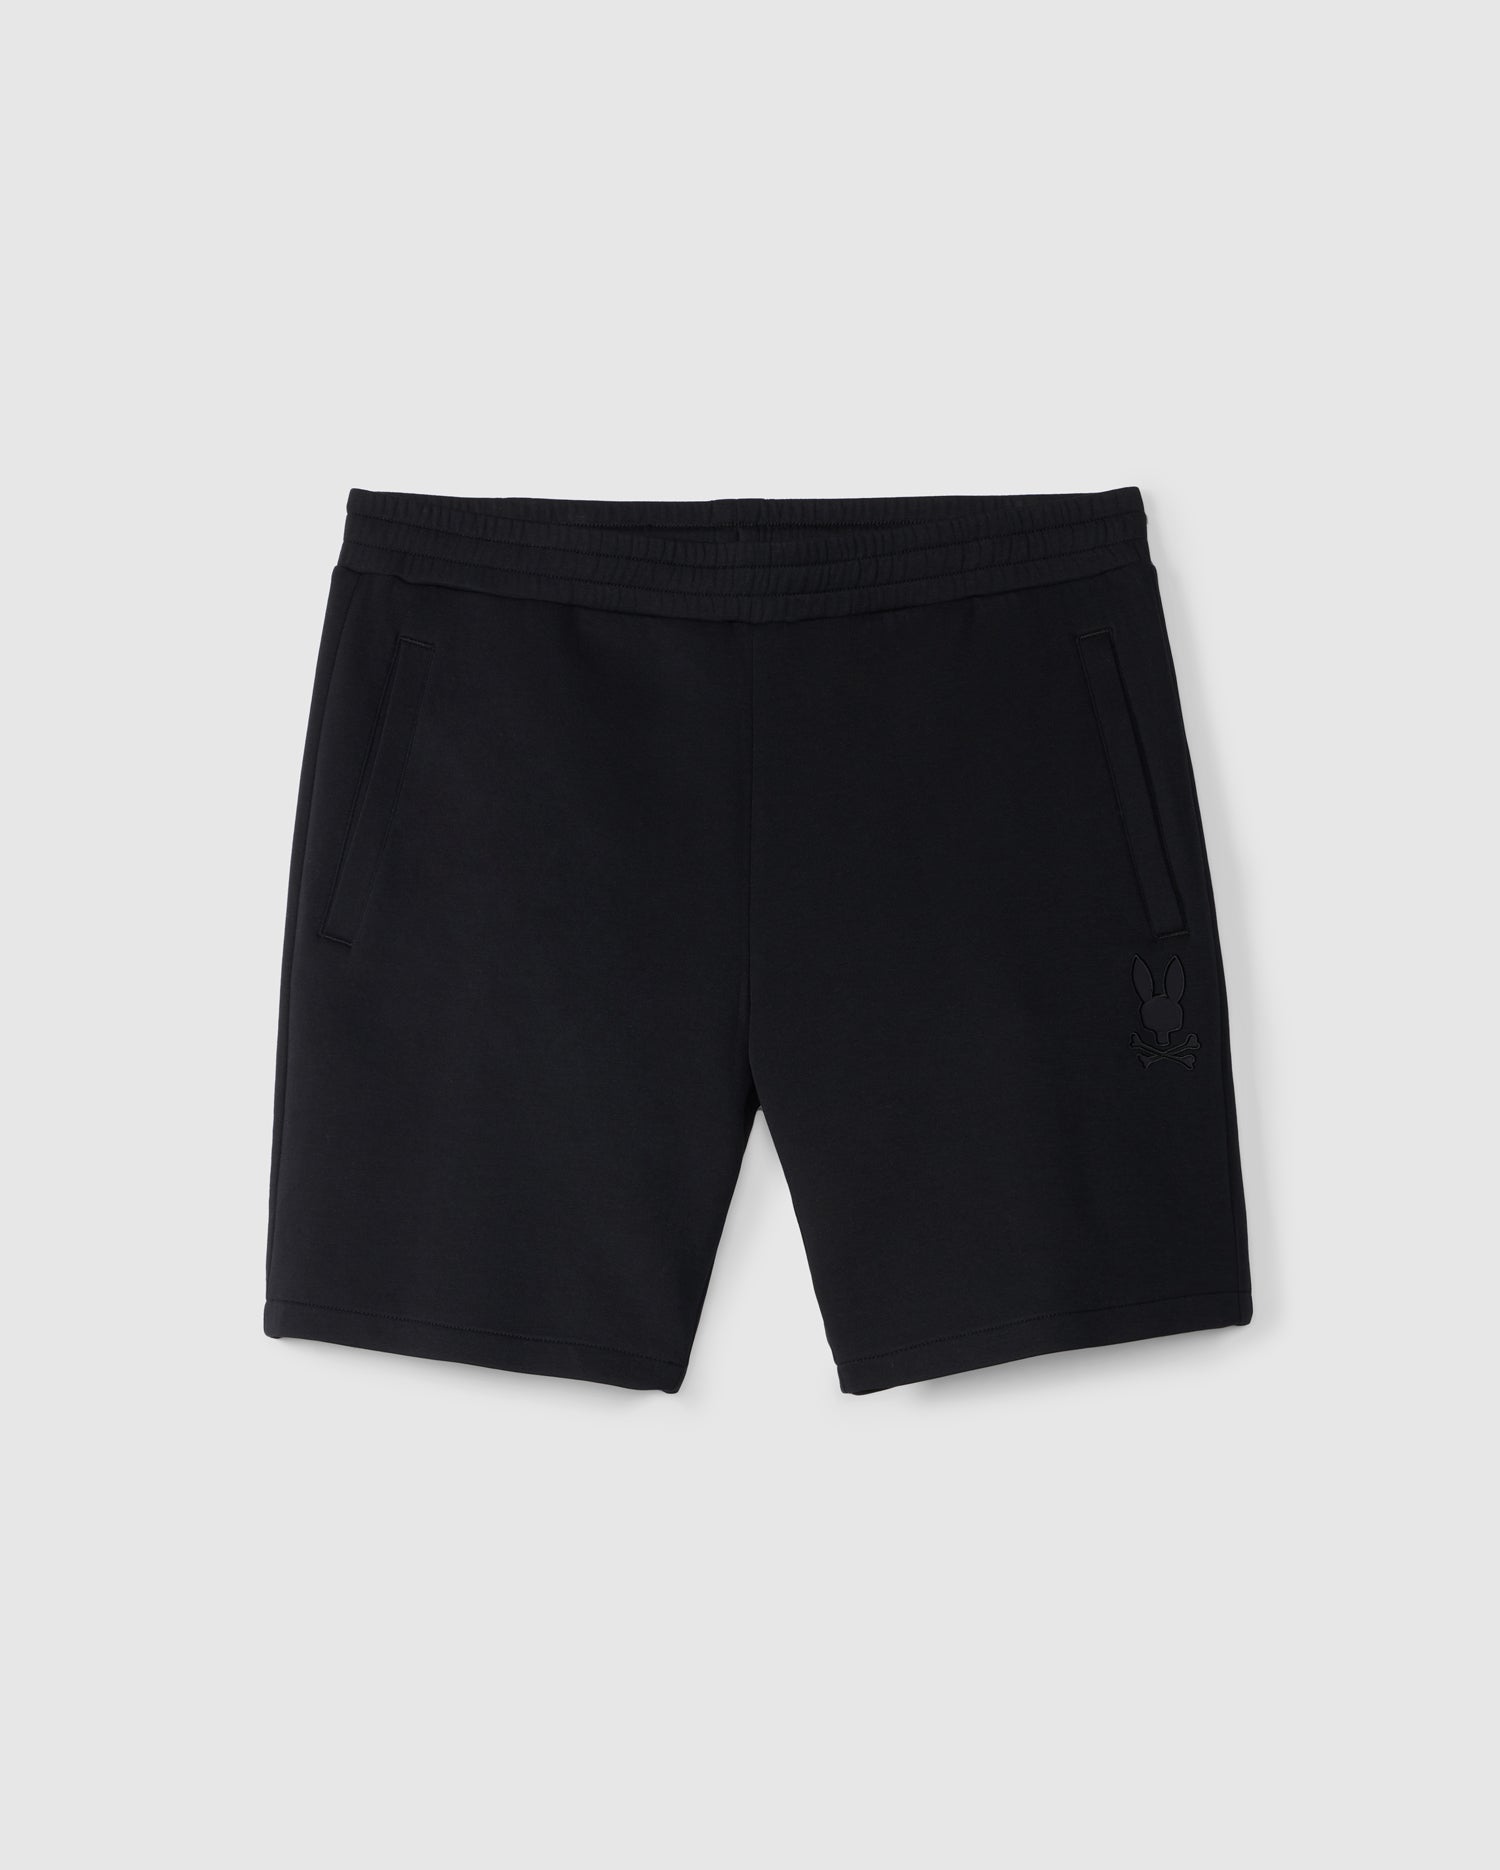 Soft stretch modal-cotton-blend jersey black shorts with an elastic waistband, featuring subtle side pockets and a small Mickey Mouse silhouette on the left leg. The MENS LYONS CASUAL SWEATSHORT - B6R578C200 by Psycho Bunny is displayed on a plain white background.